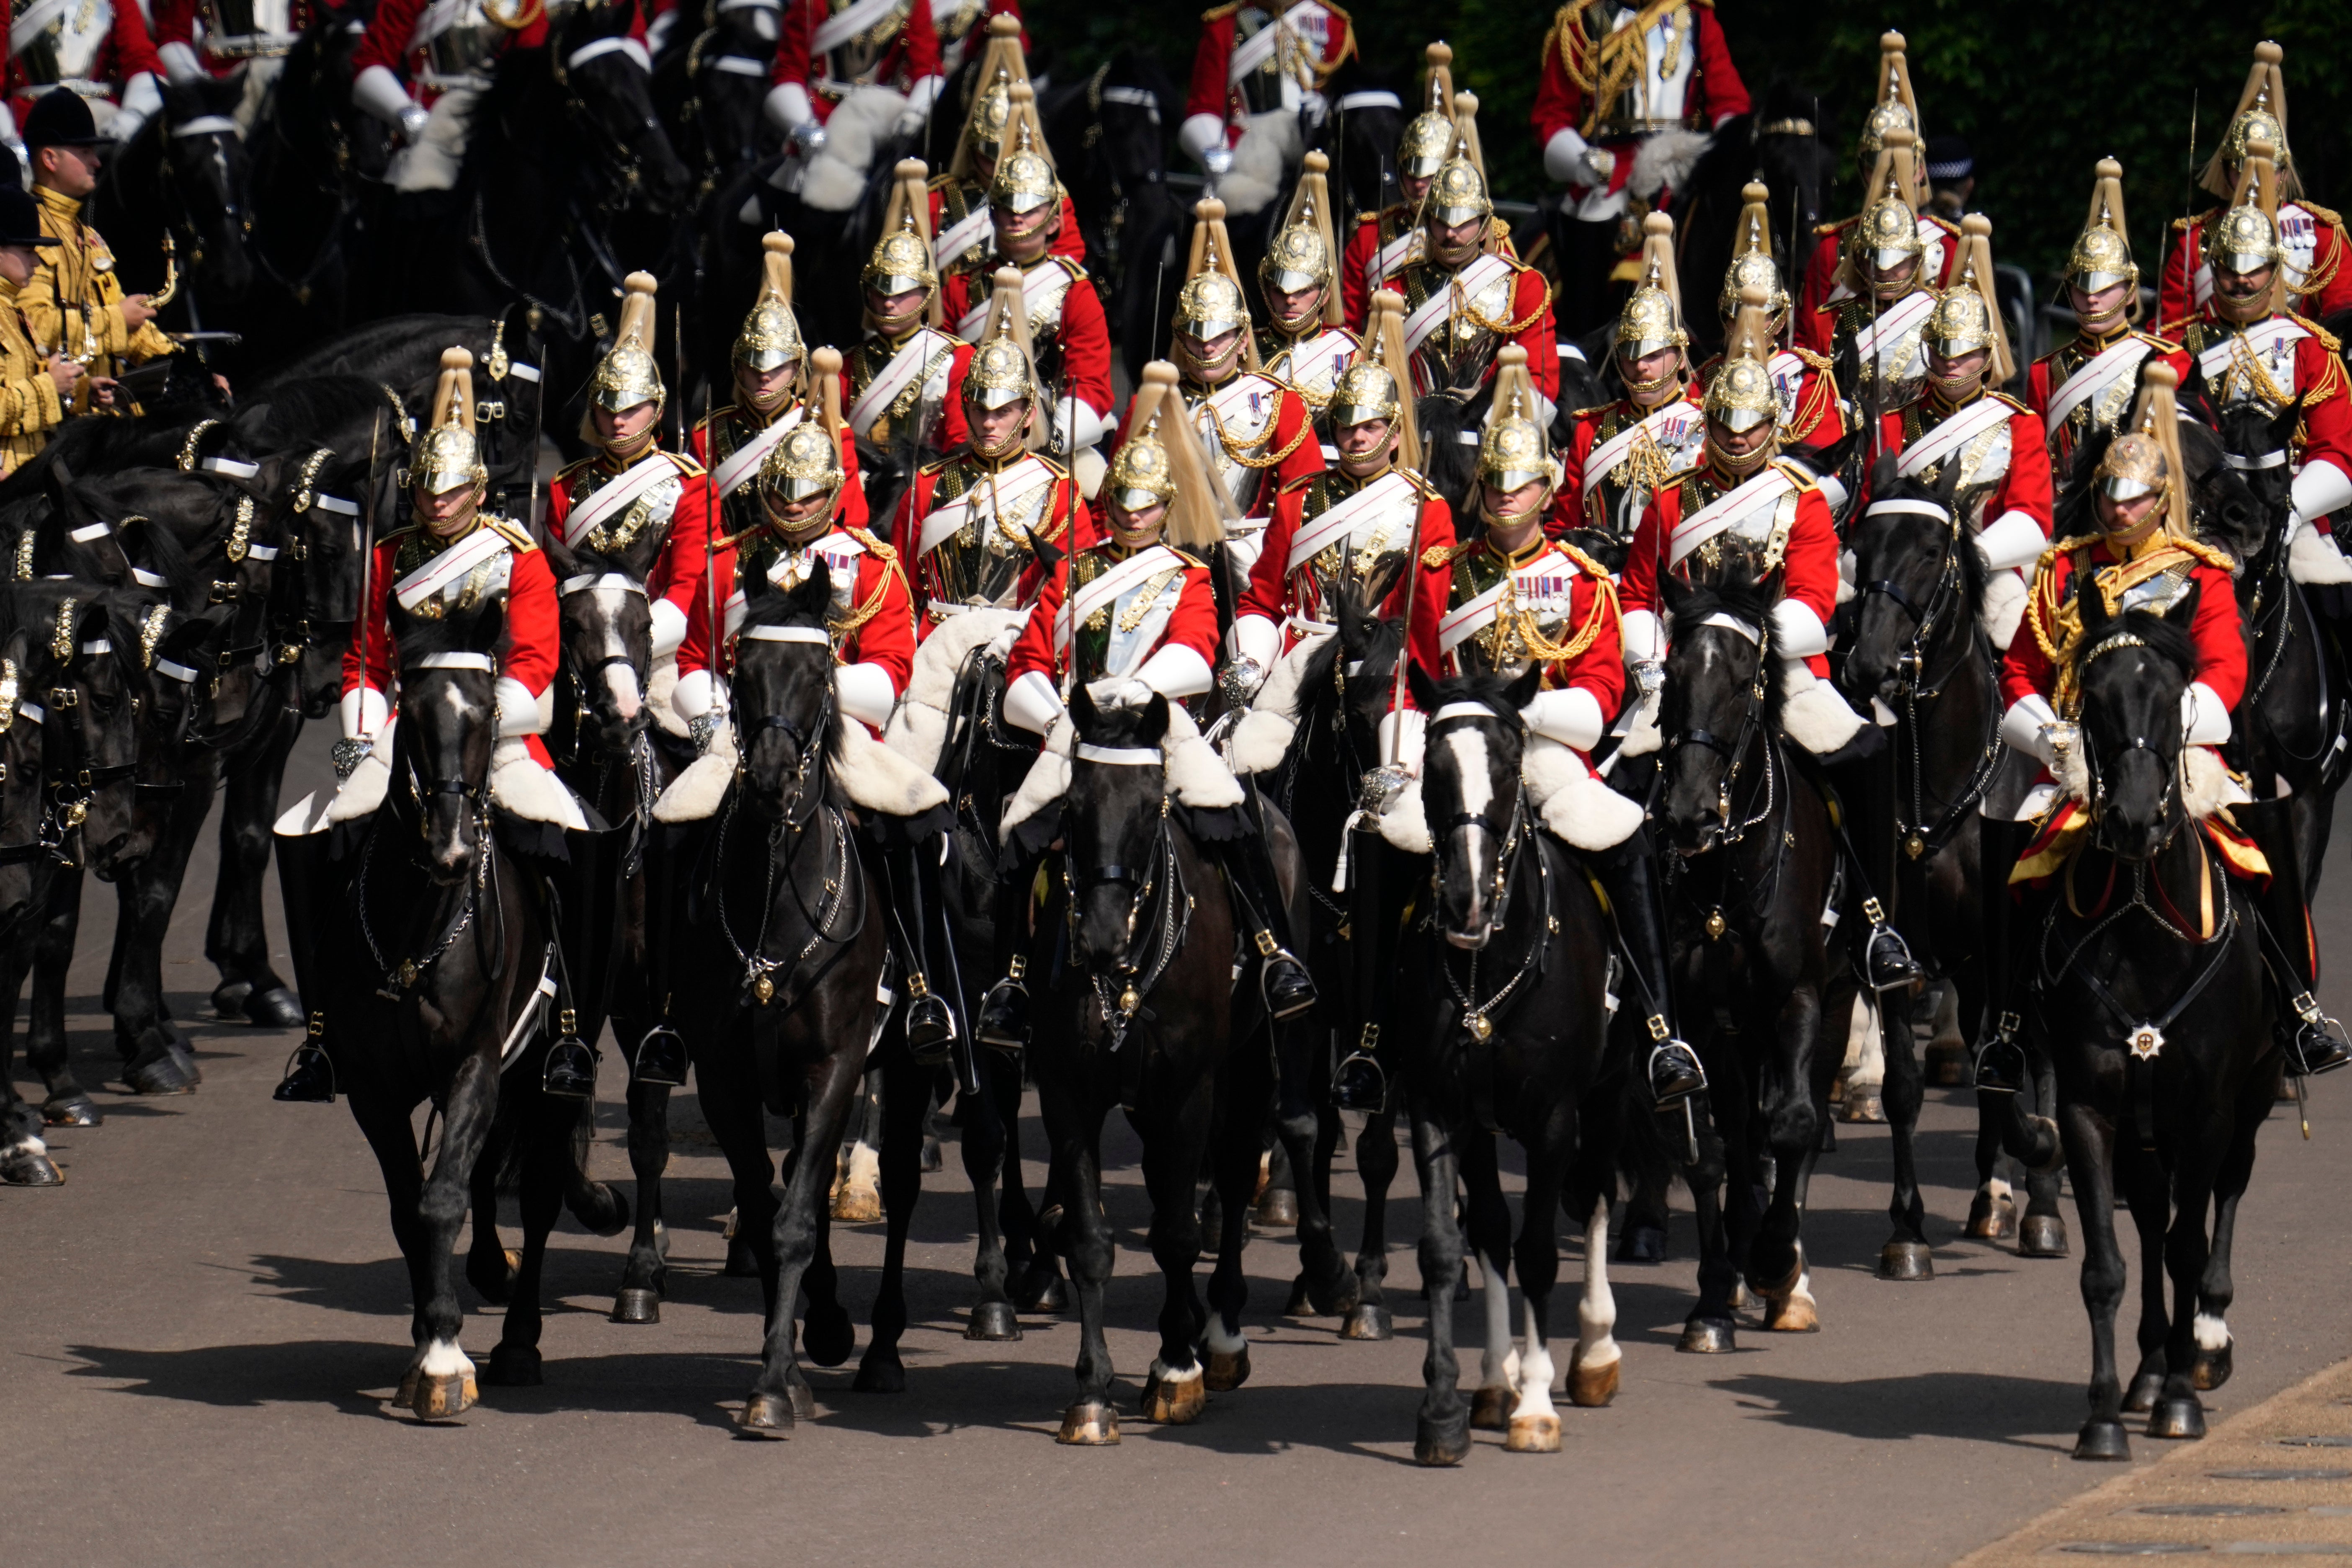 Trooping The Colour, also known as The Queen's Birthday Parade, was the first event of the day